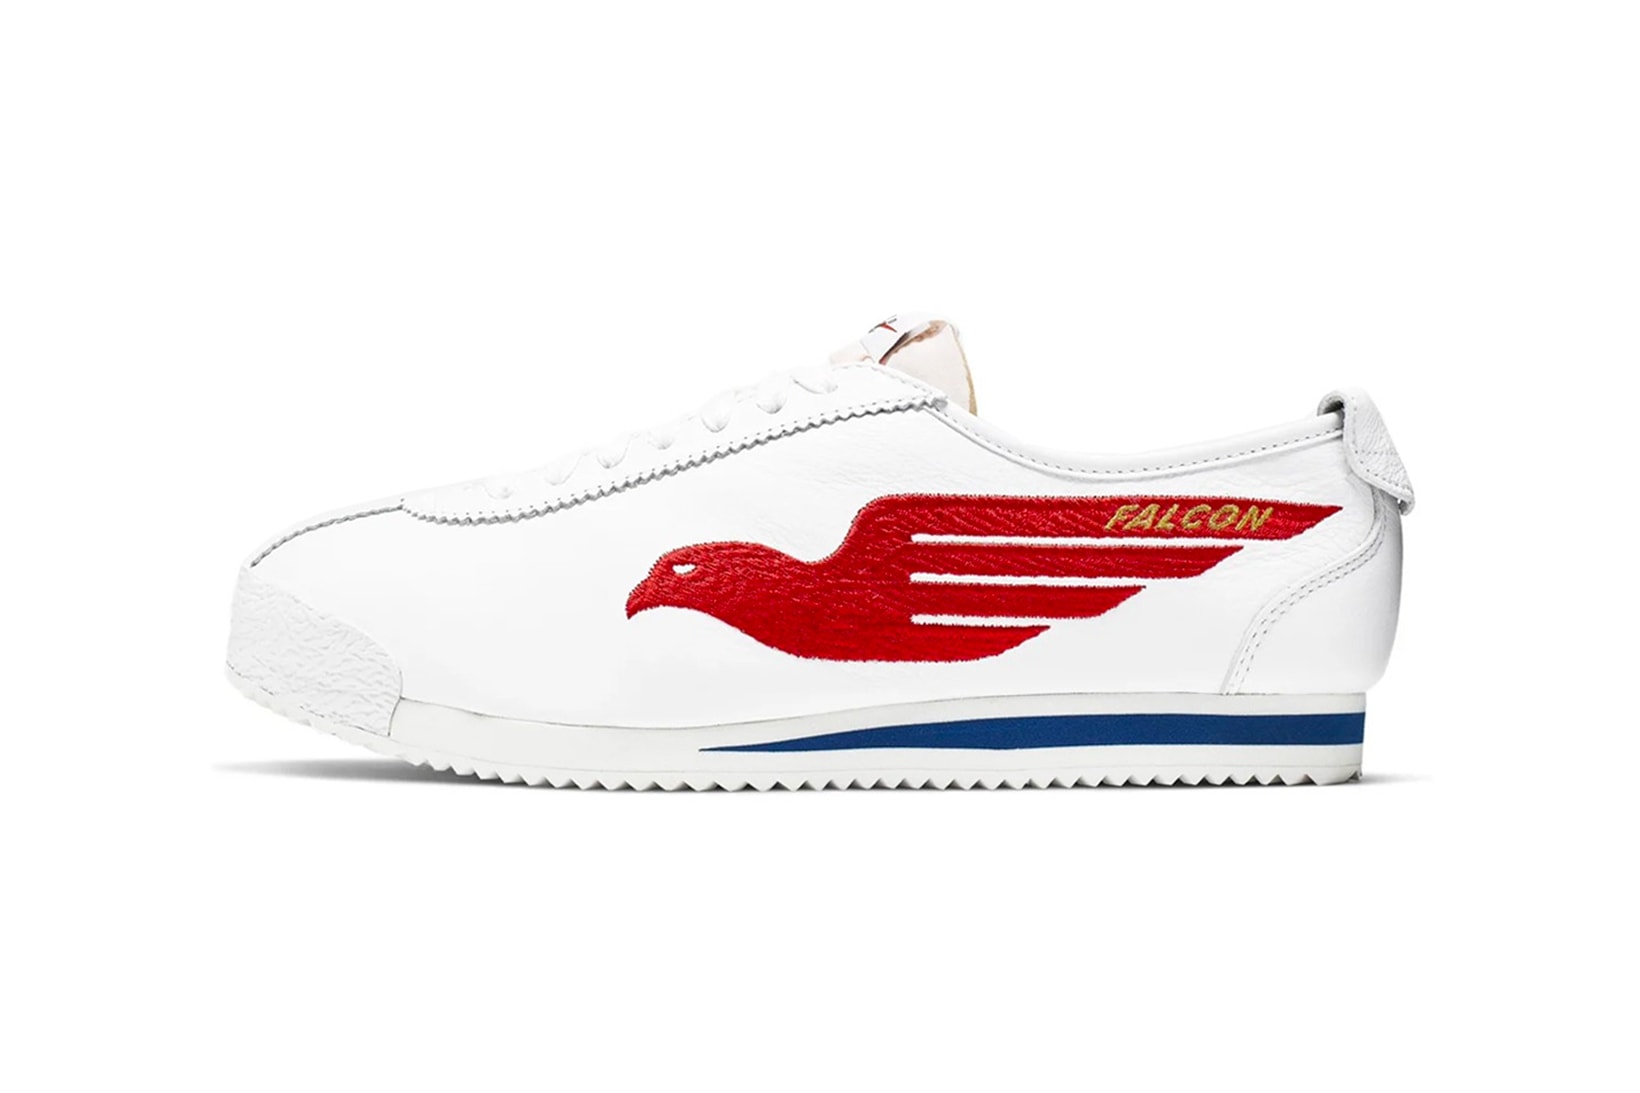 nike classic cortez shoe dog pack falcon dimension six sneakers white red blue colorway